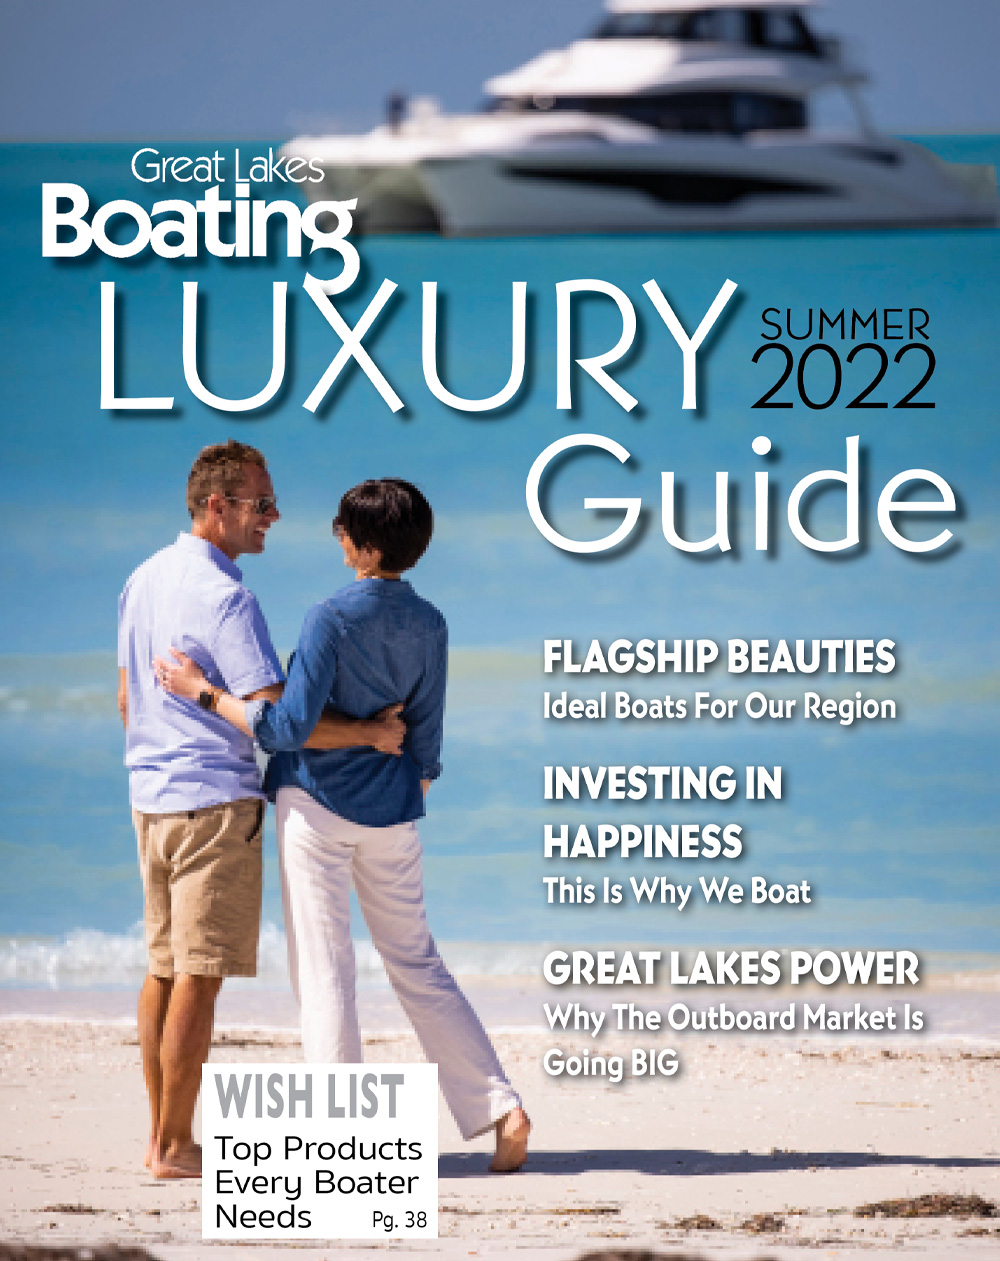 Great Lakes Boating Summer 2022 Luxury Guide cover